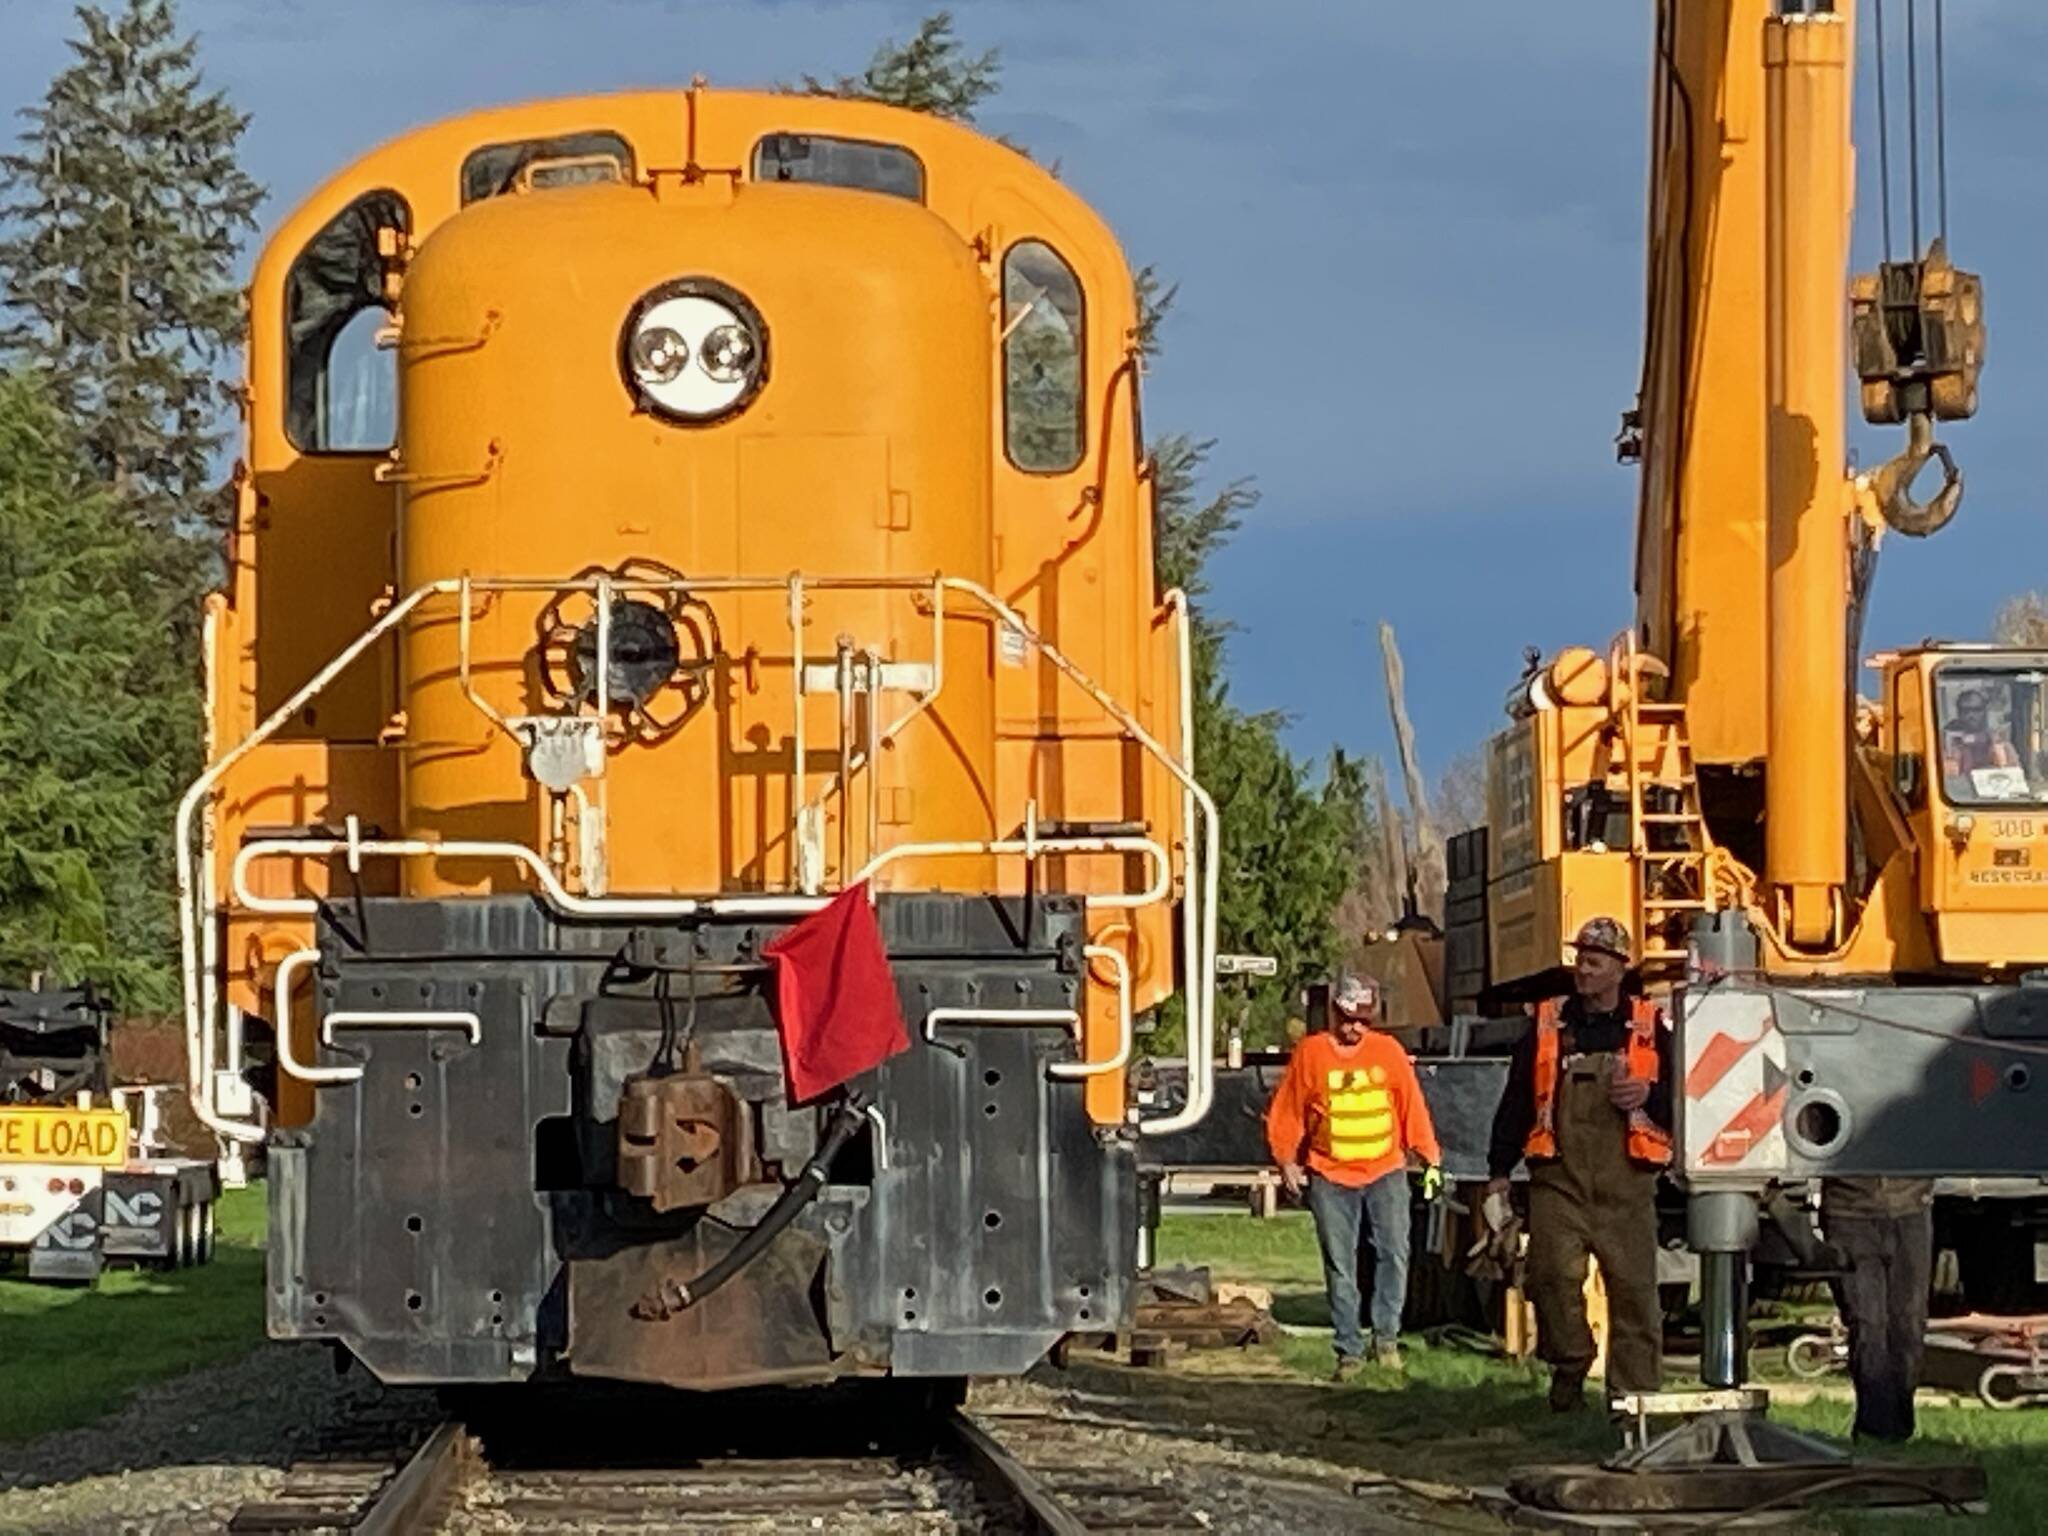 Workers prepare to move Locomotive 201 from the Northwest Railway Museum in Snoqualmie back to its home track at the Nevada Northern Railway Foundation in Ely, Nevada. Photo William Shaw/Valley Record